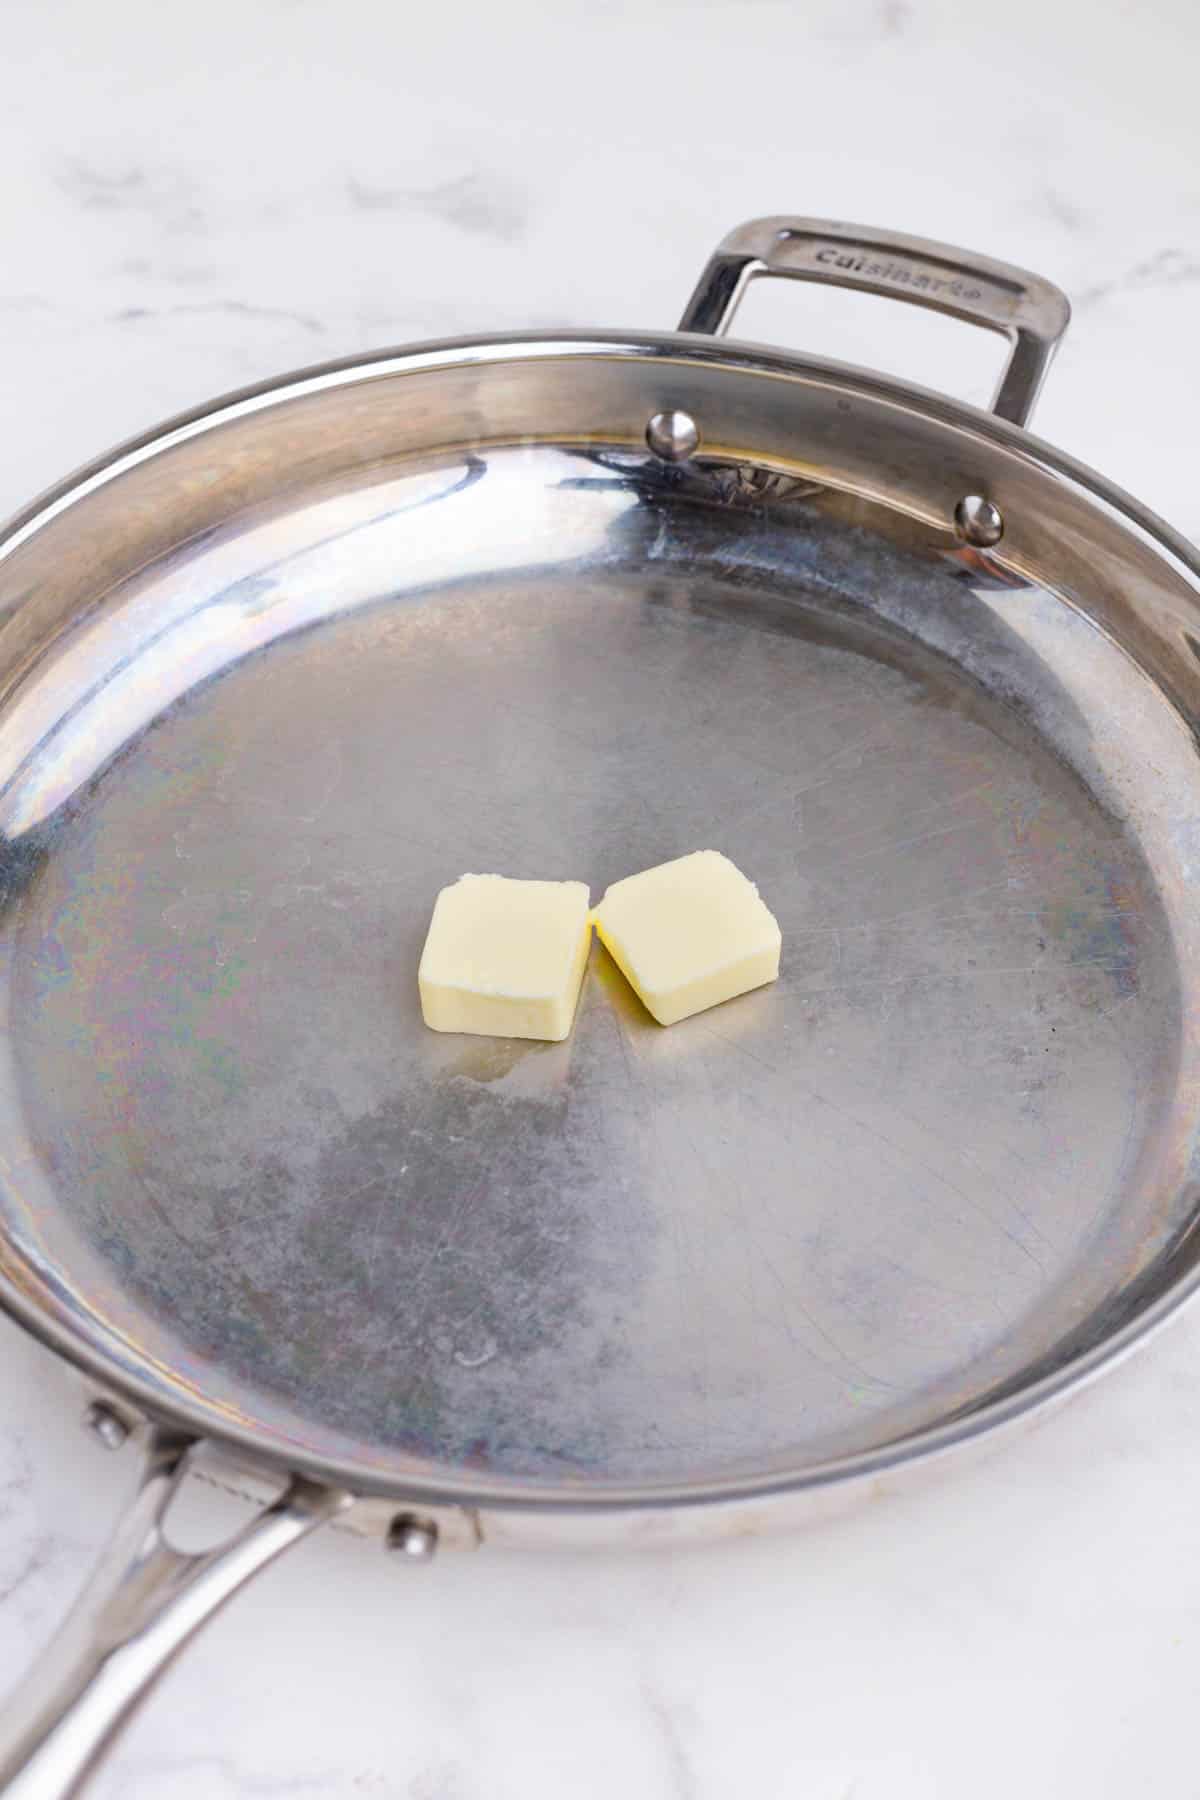 Butter is added to a skillet.